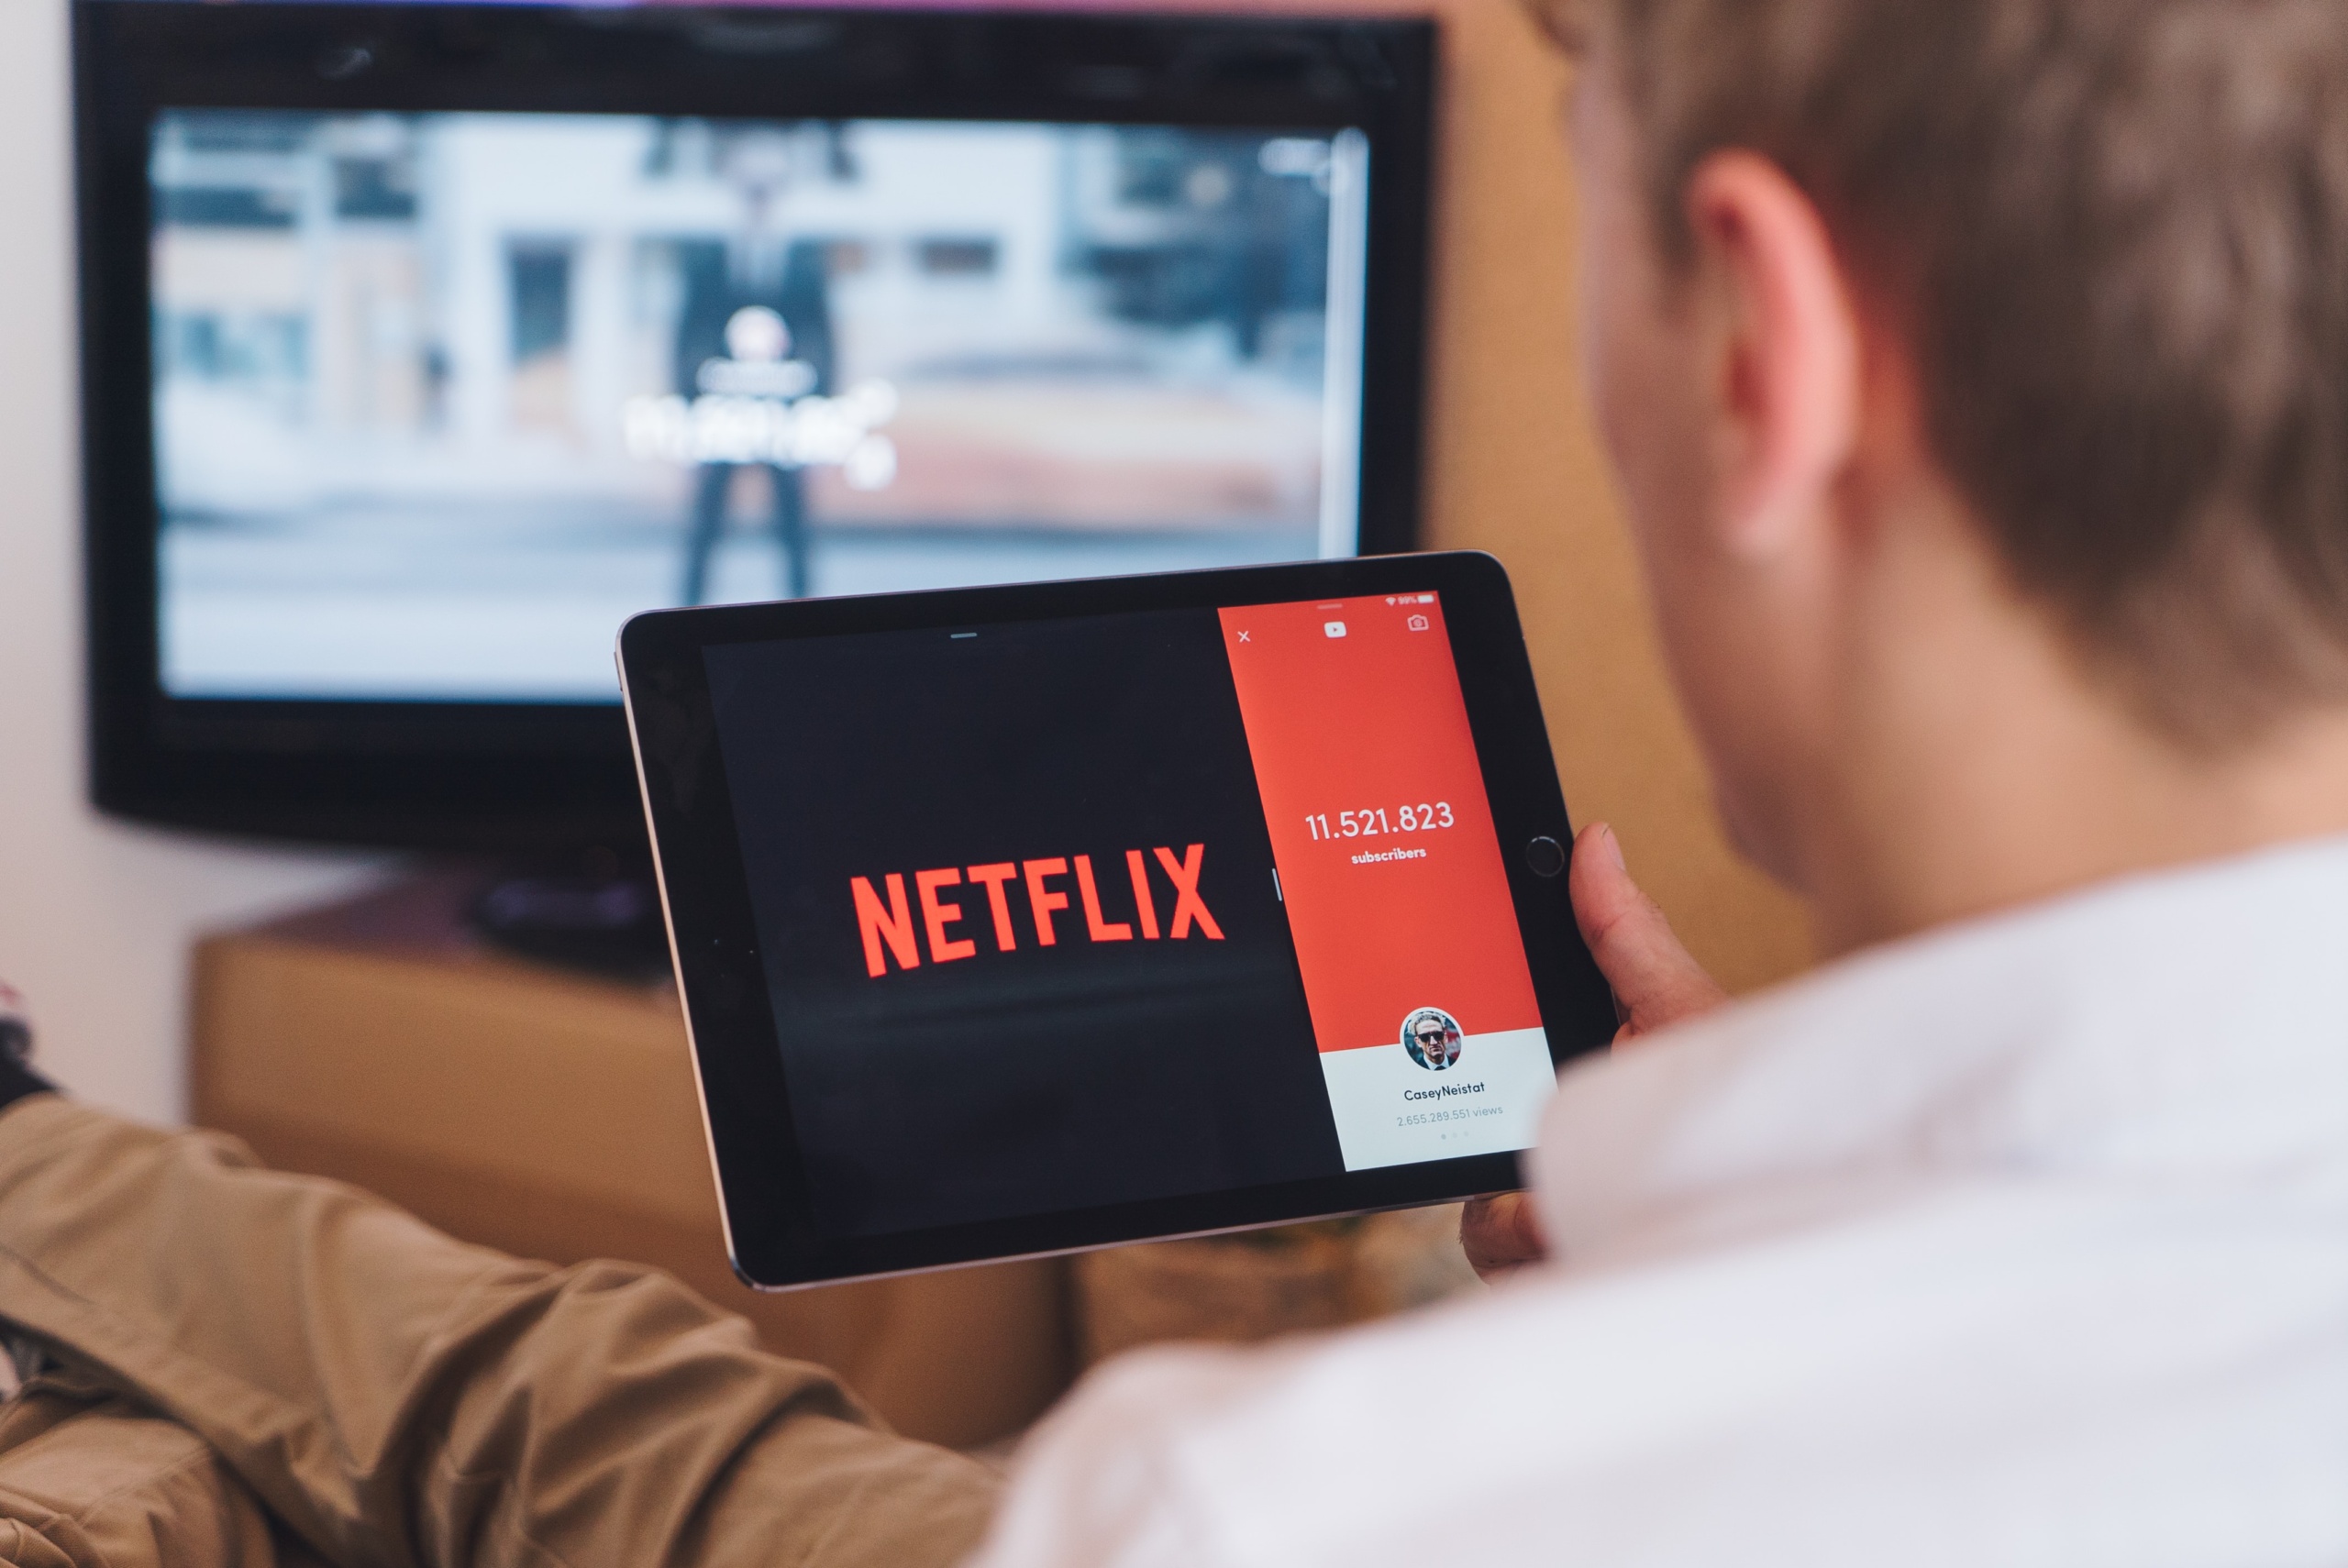 The European Commission is exploring the possibility of making Netflix and other streaming services pay providers for the generated traffic